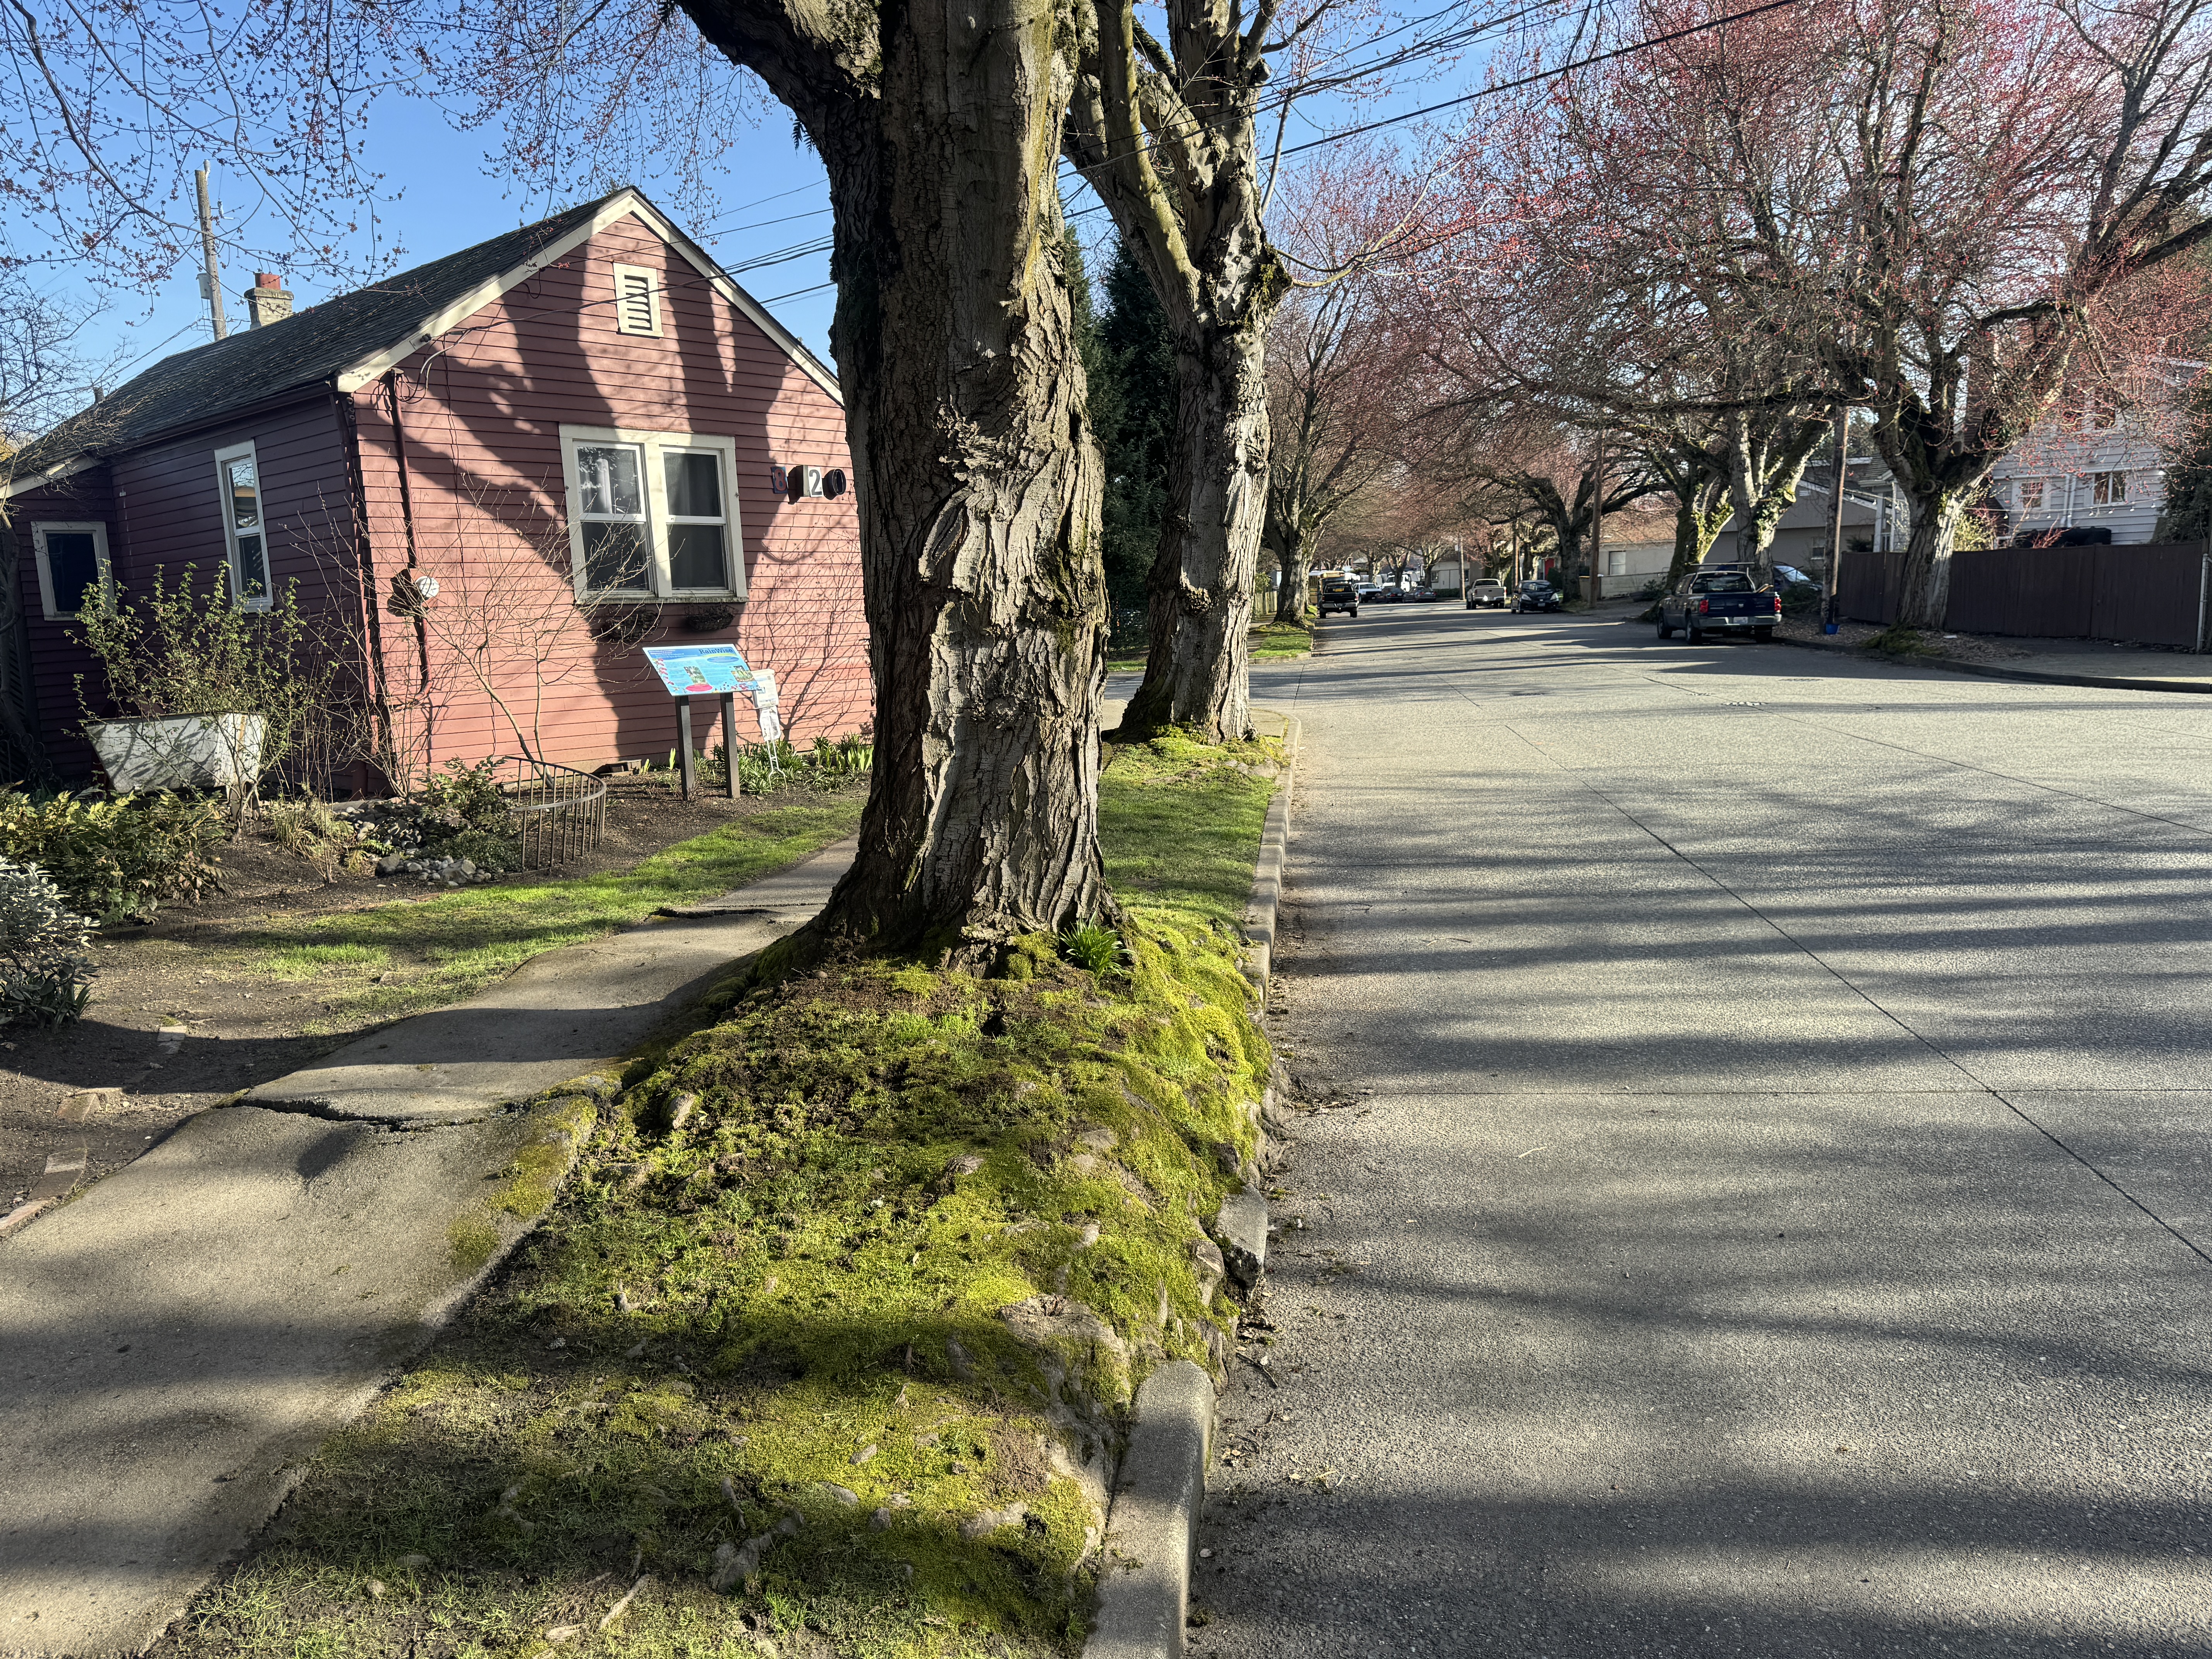 The overgrown and constrained roots of a tree cause damage to both the curb and the nearby sidewalk